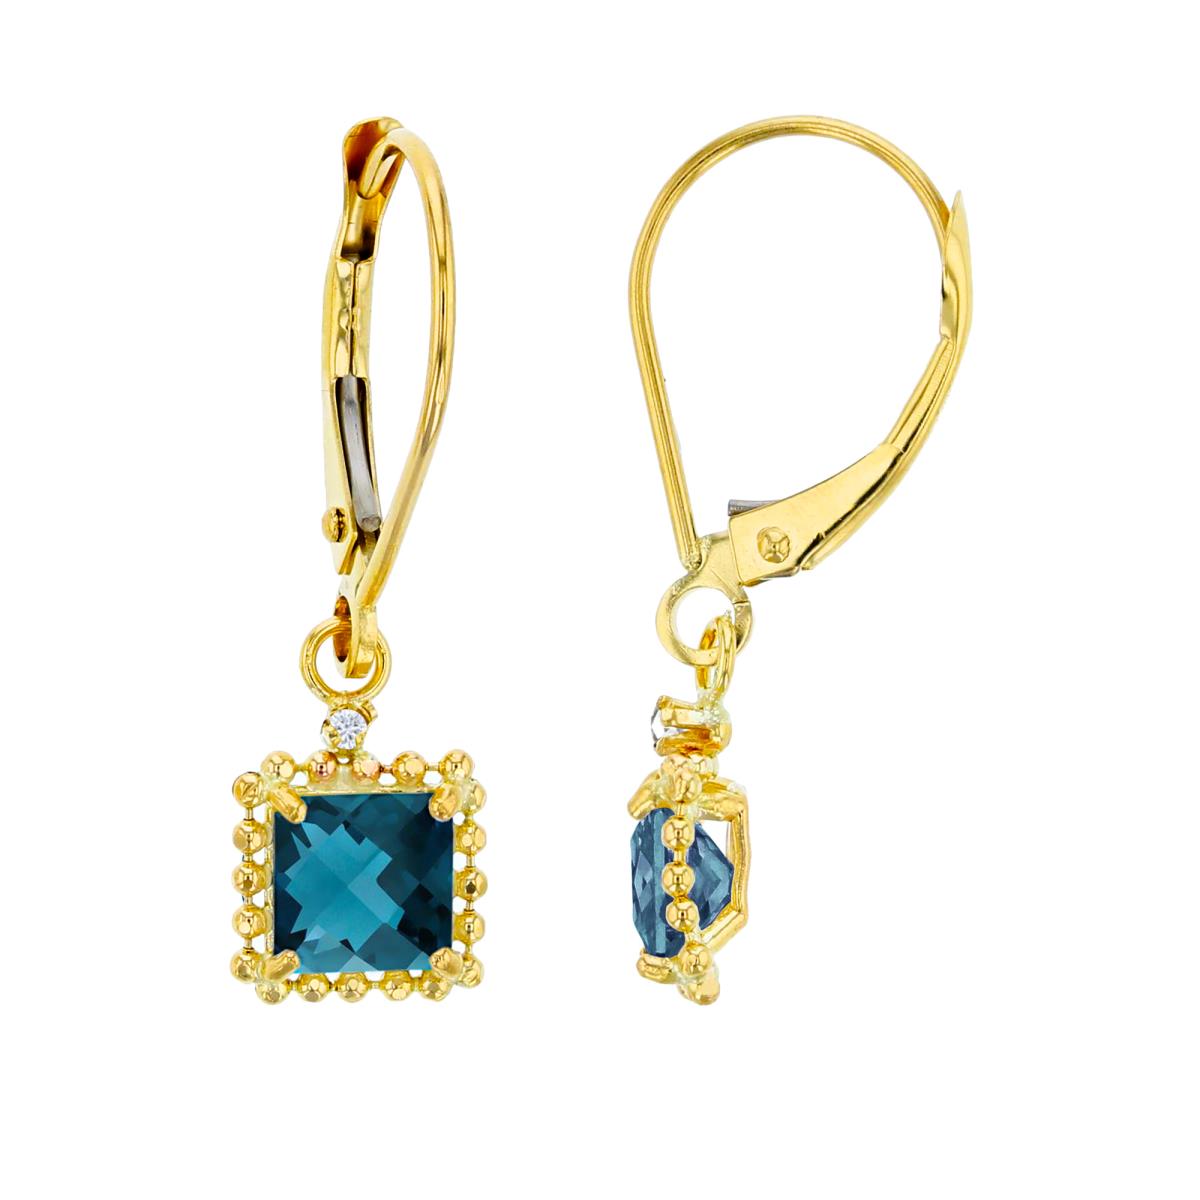 10K Yellow Gold 1.25mm Rd Created White Sapphire & 5mm Sq London Blue Topaz Bead Frame Drop Lever-Back Earring